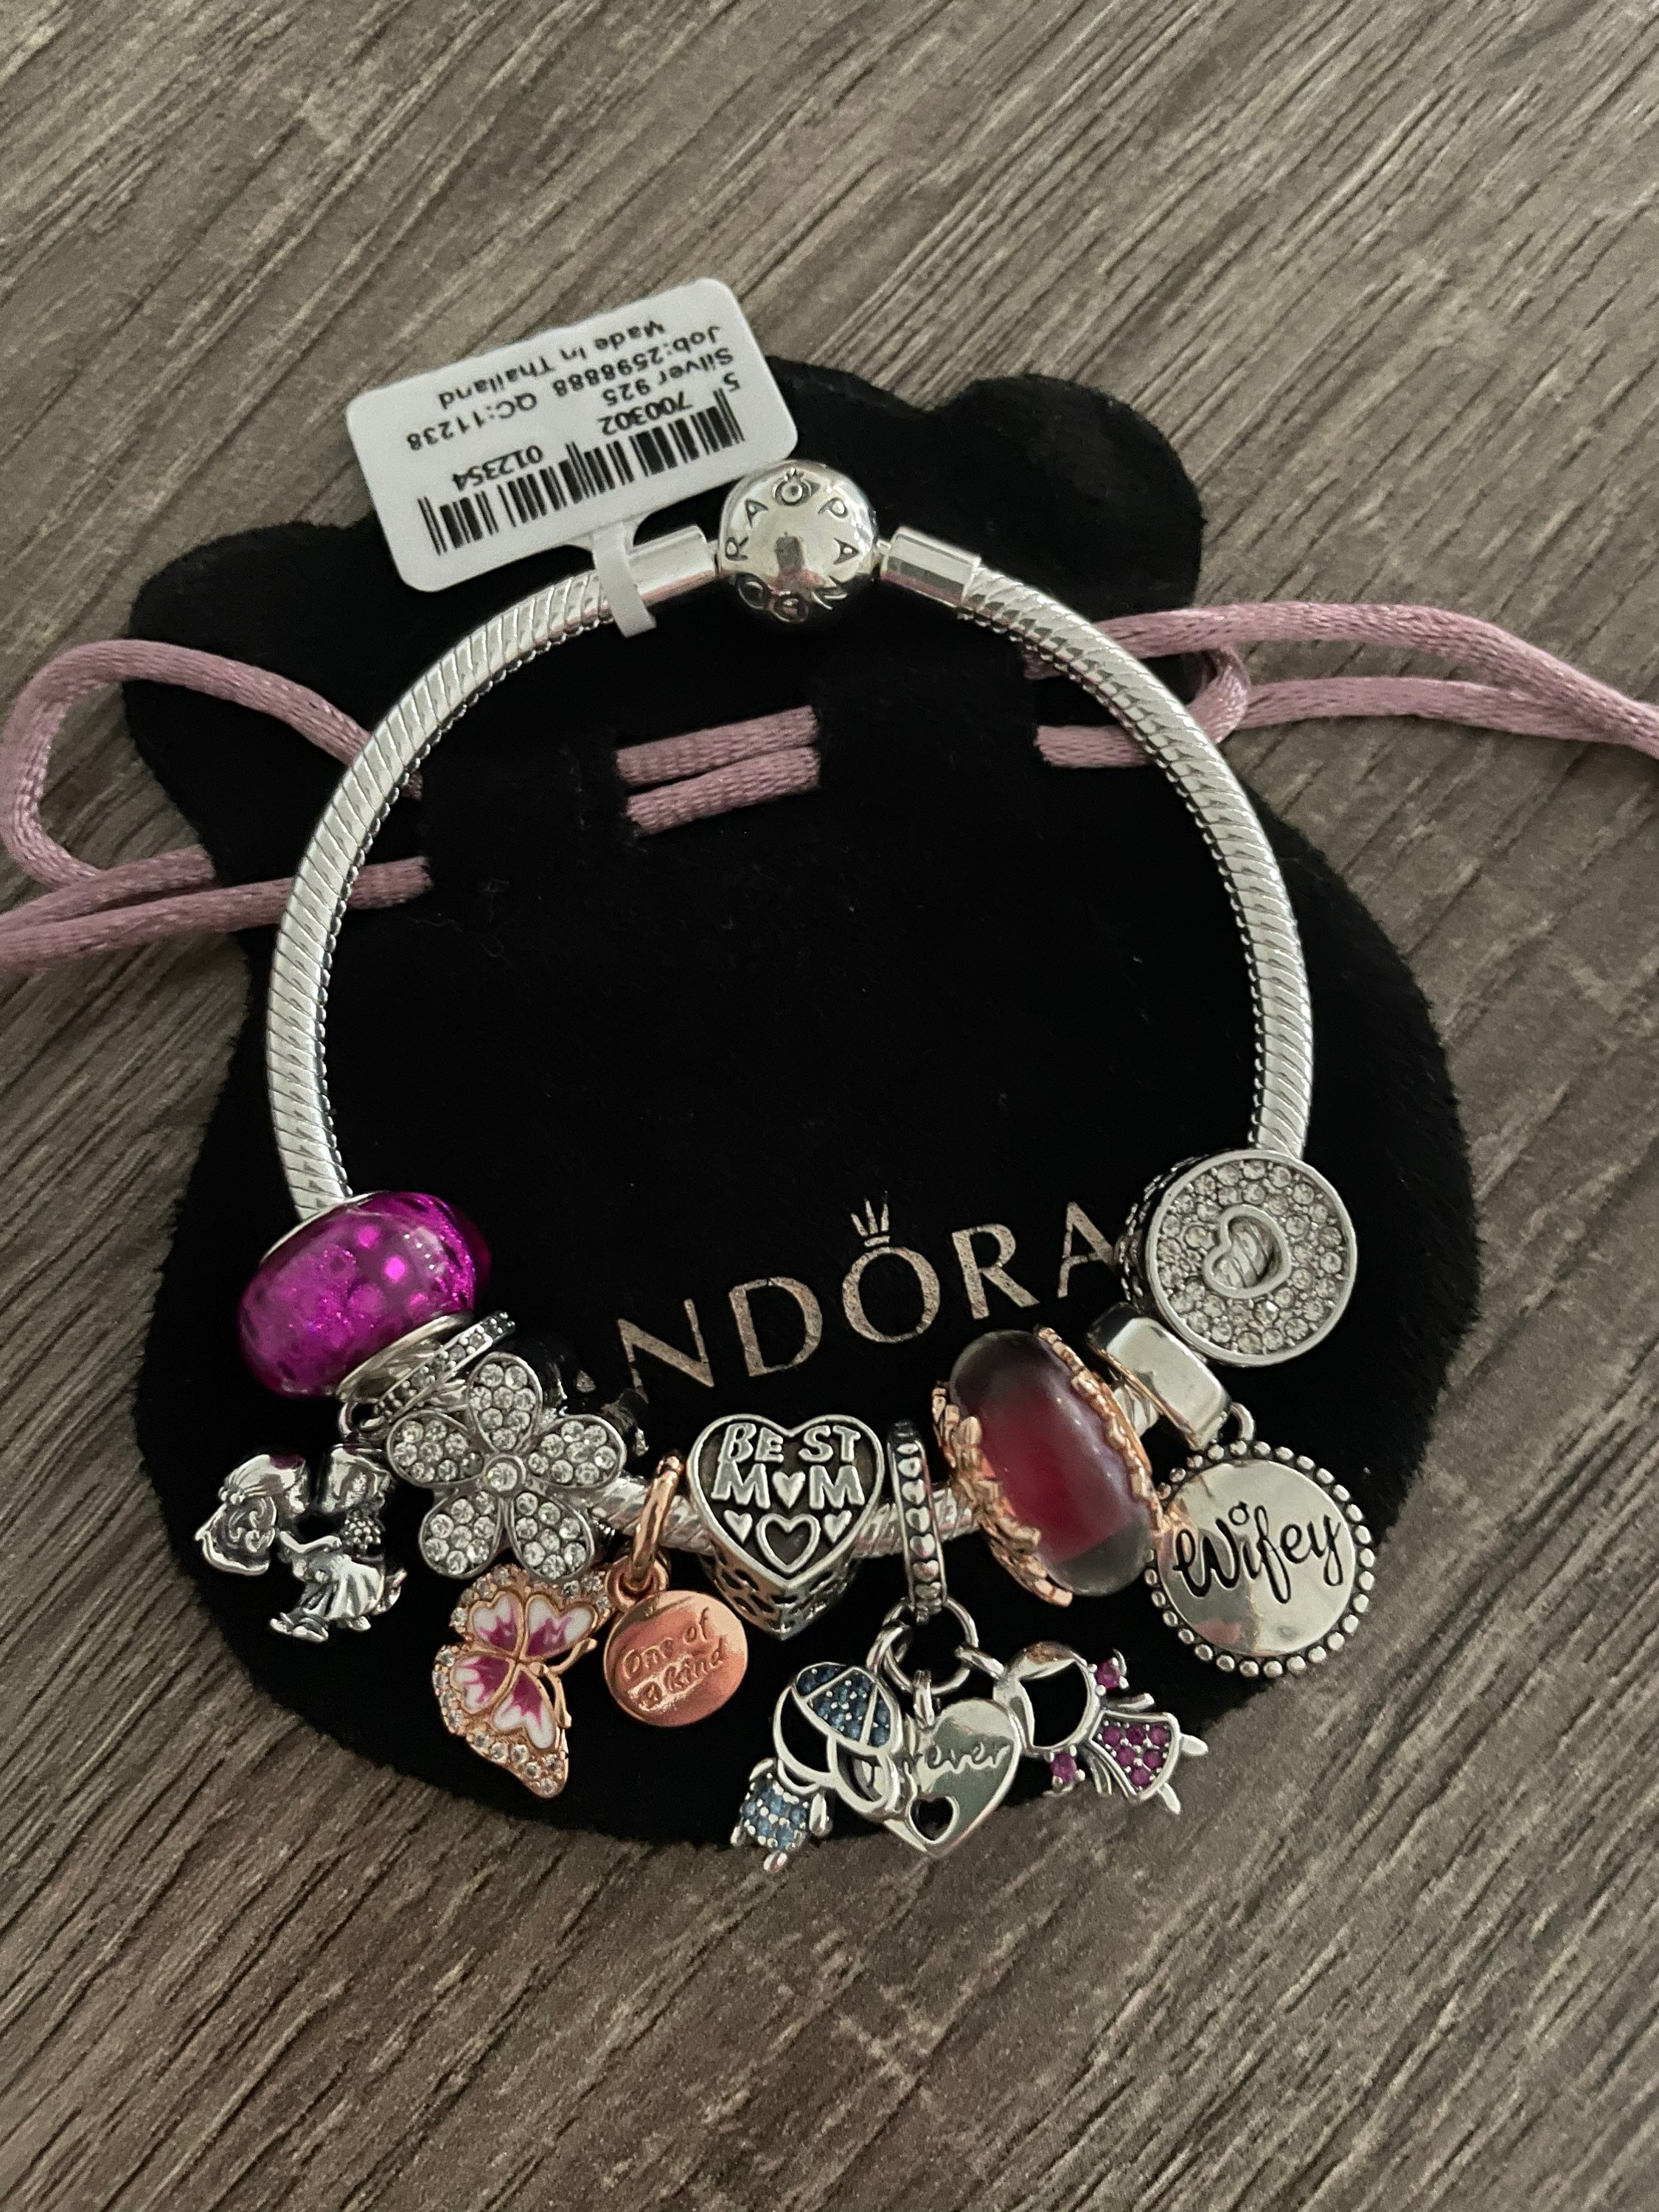 Pandora Bracelet With Wife Charms Themed and Etsy Mom 